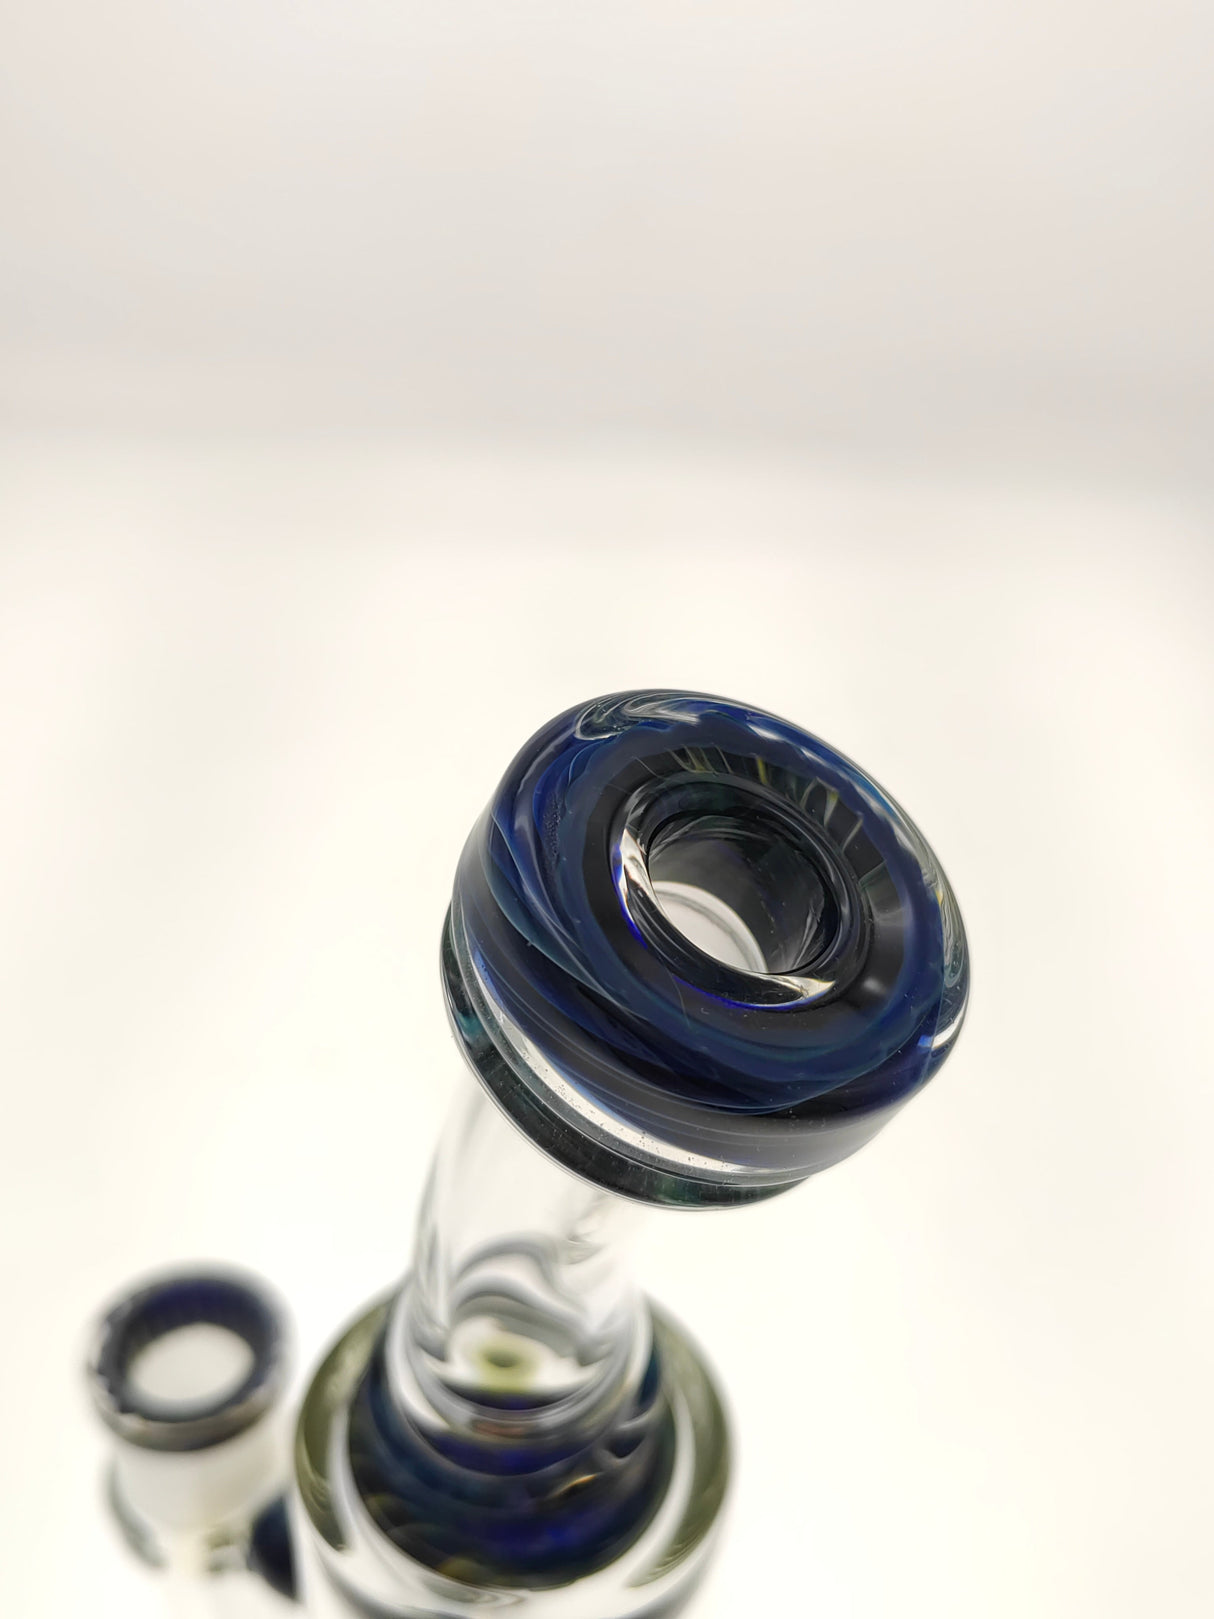 TAG 8" Super Slit Puck Klein Incycler top view showing intricate blue swirl design and 14MM Female joint